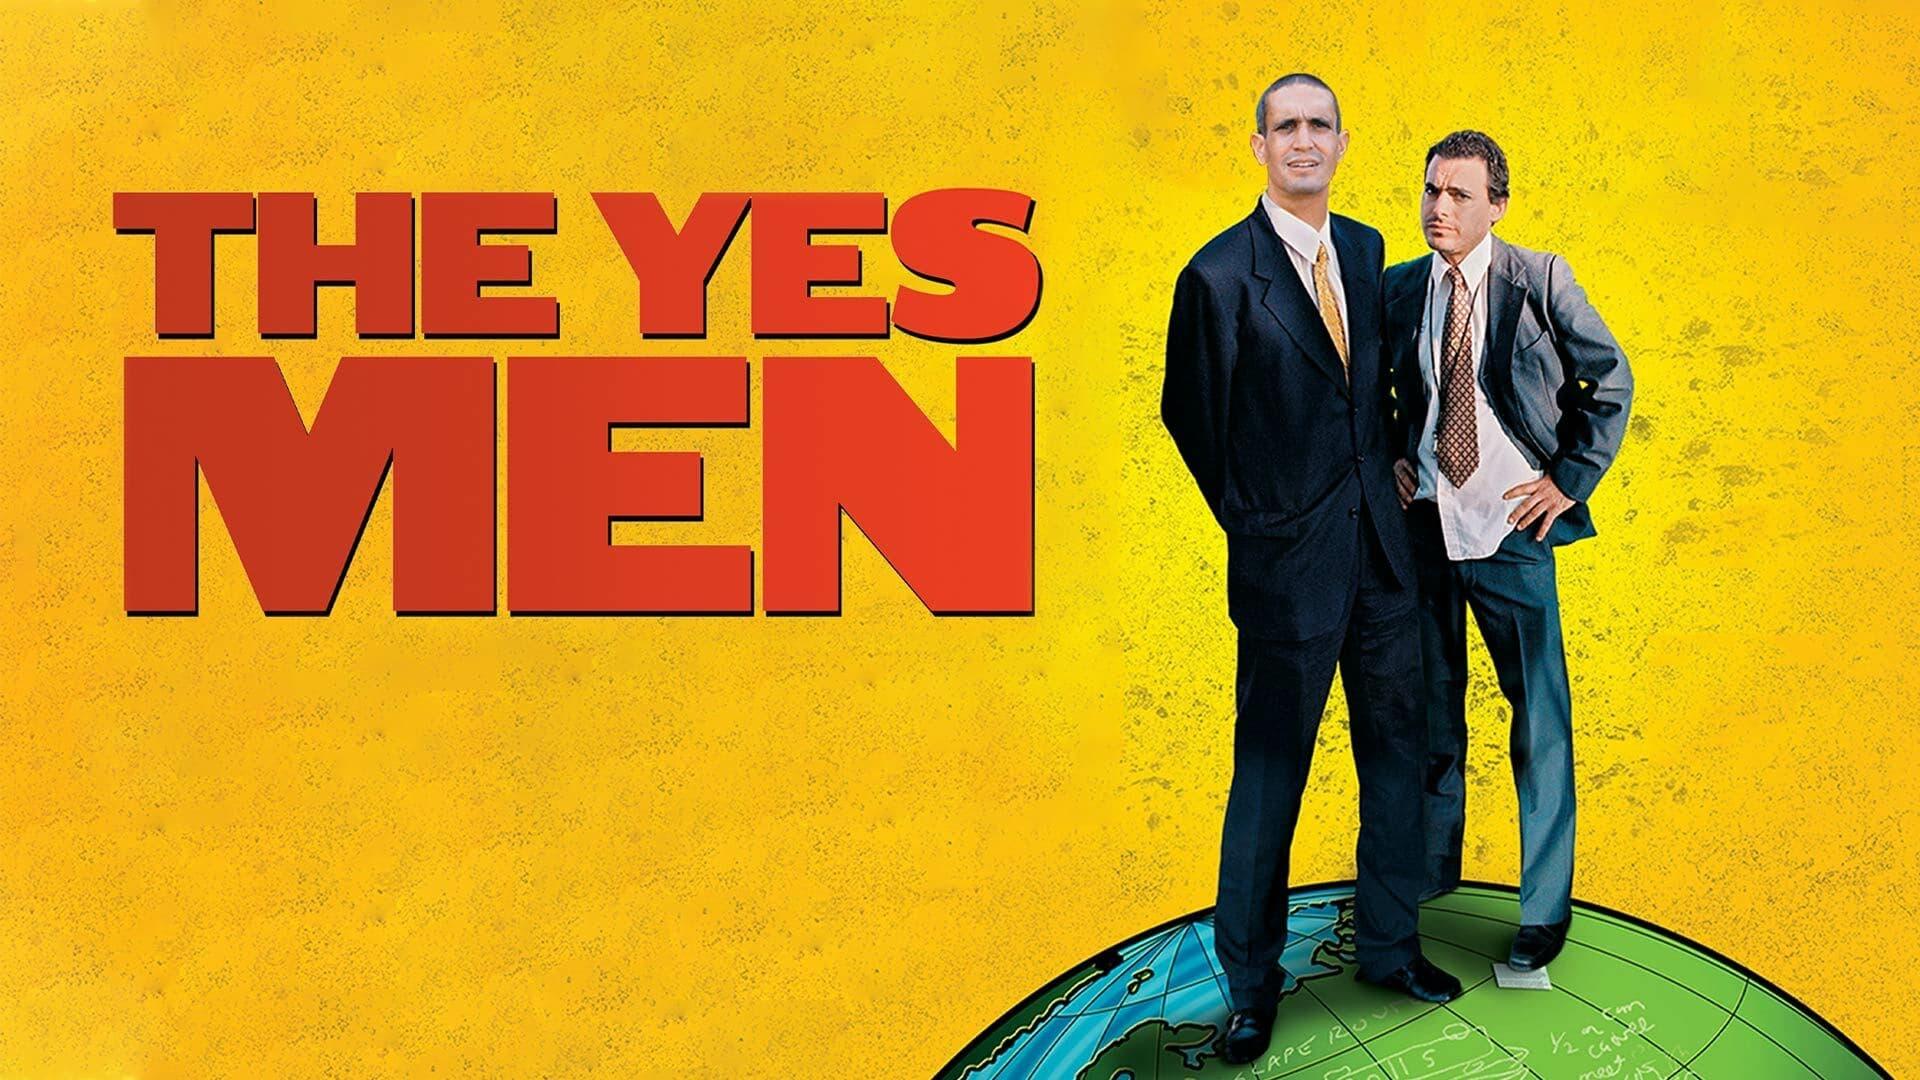 The Yes Men backdrop